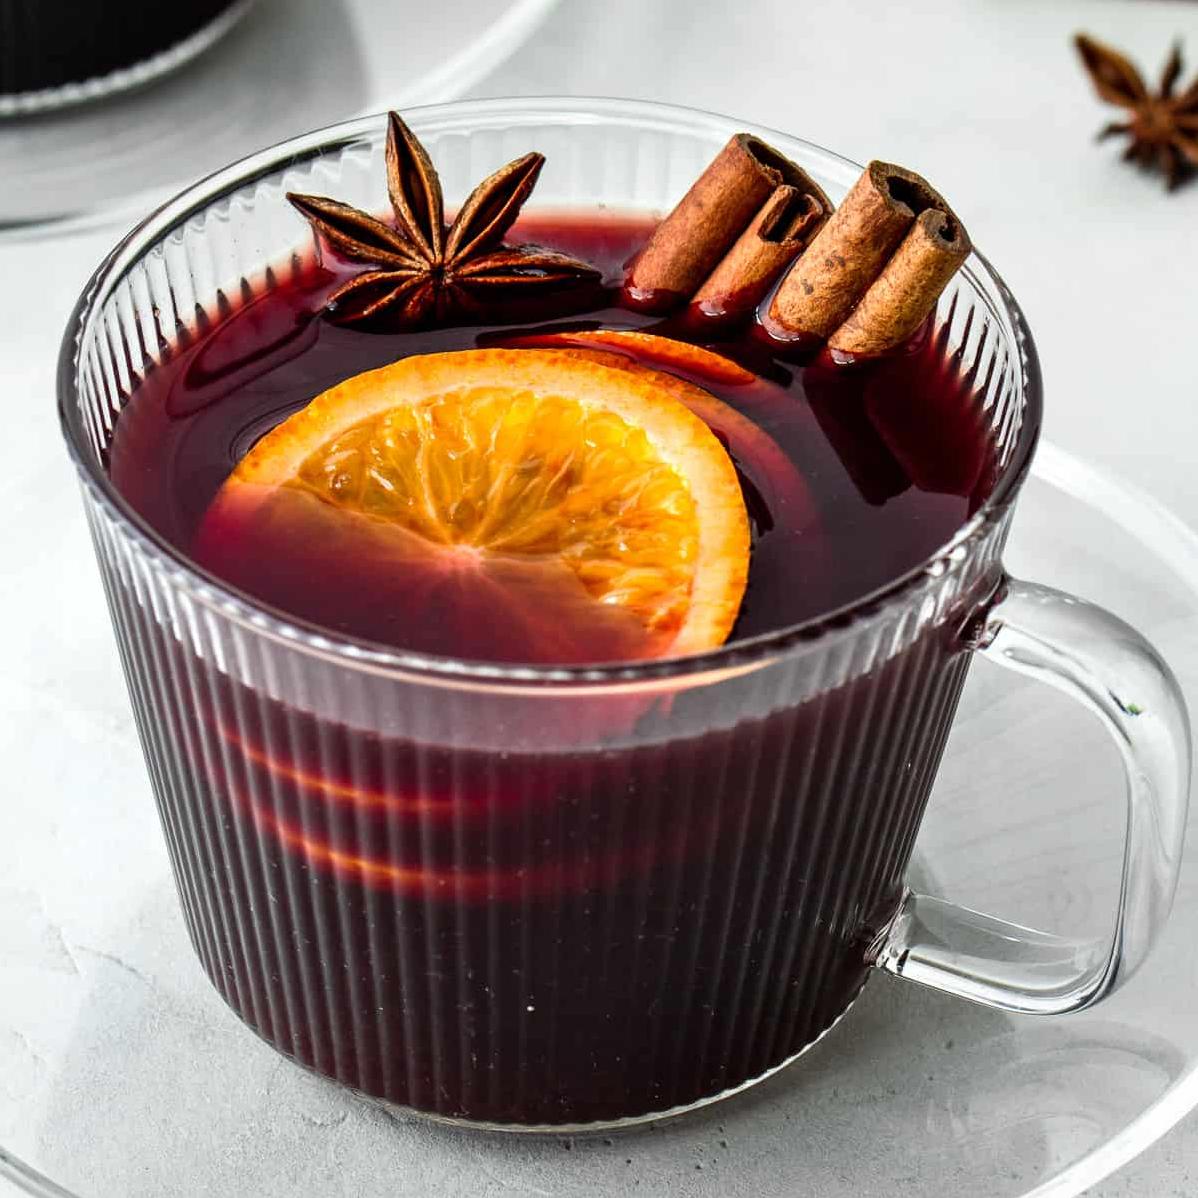  Nothing screams “Christmas” like the warm, spicy aroma of mulled wine.